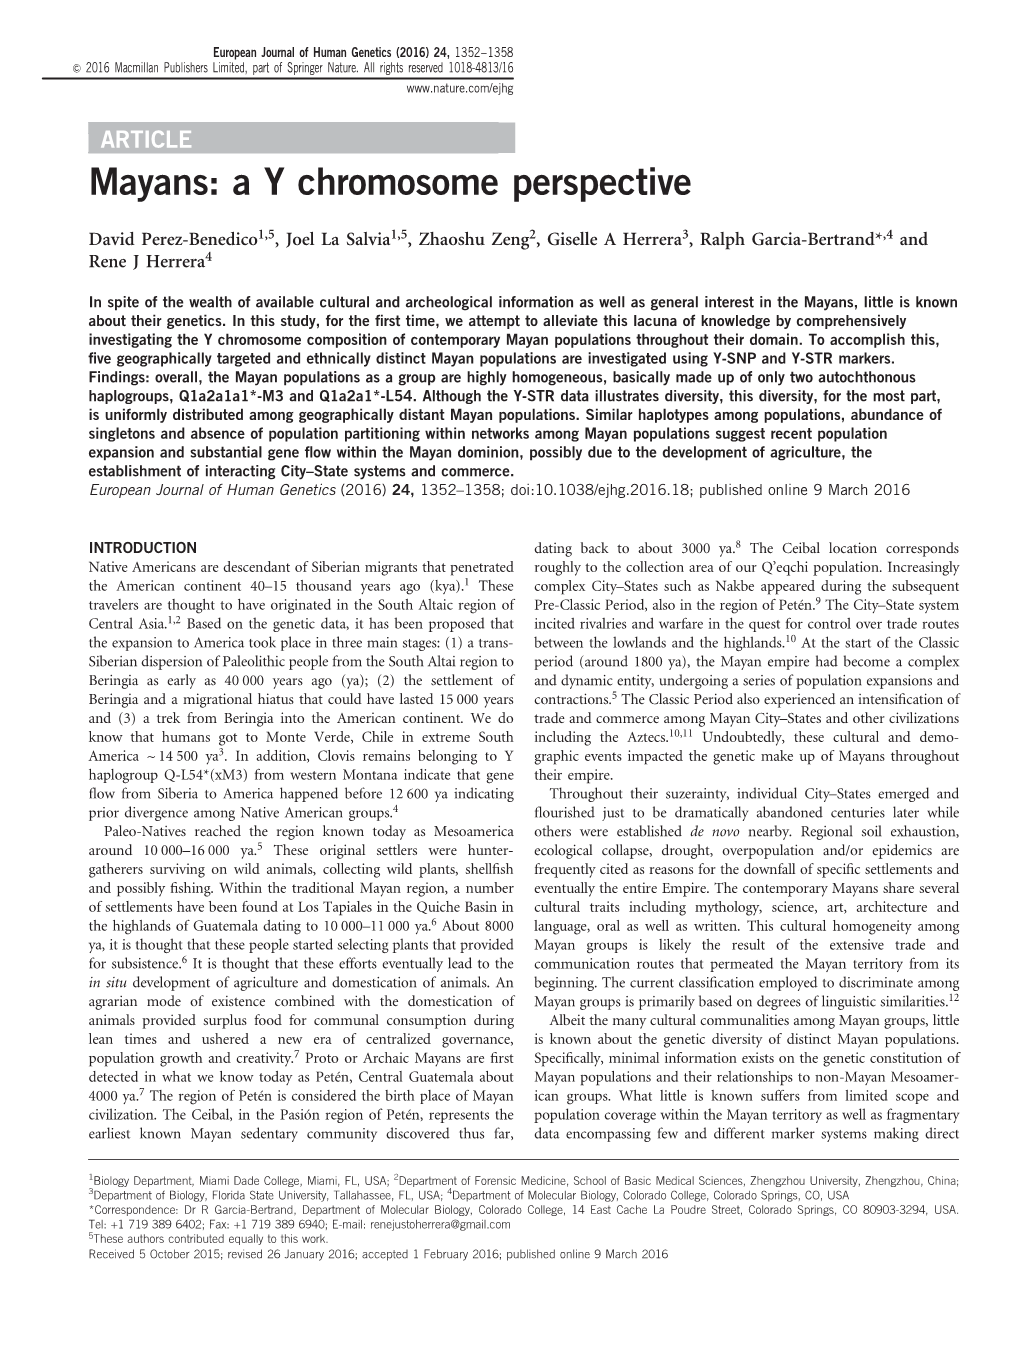 Mayans: a Y Chromosome Perspective